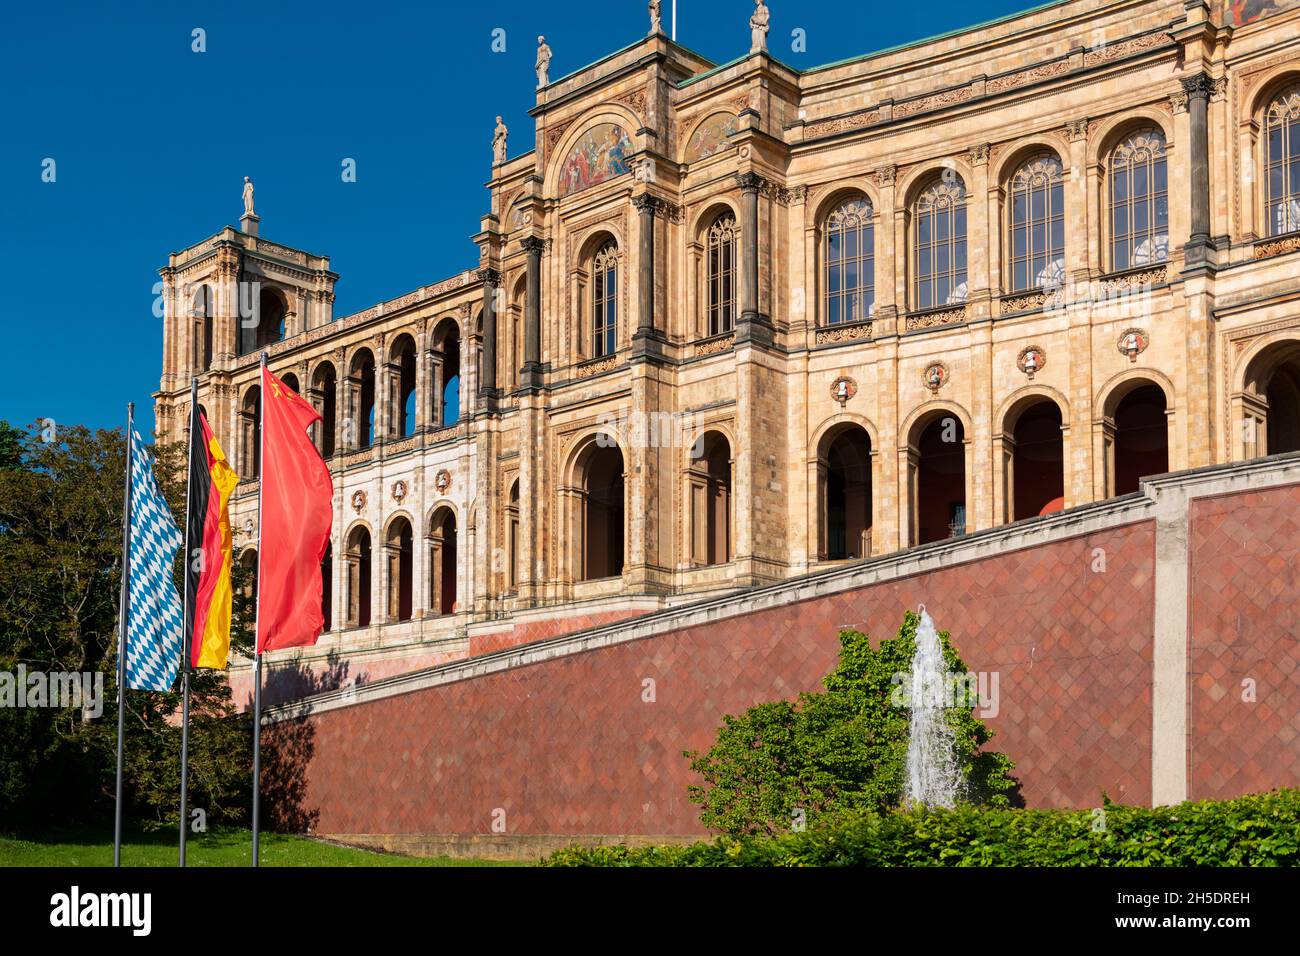 23 May 2019 Munich, Germany - Maximilianeum was built as the home of a gifted students' foundation but since 1949 has housed the Bavarian State Parlia Stock Photo